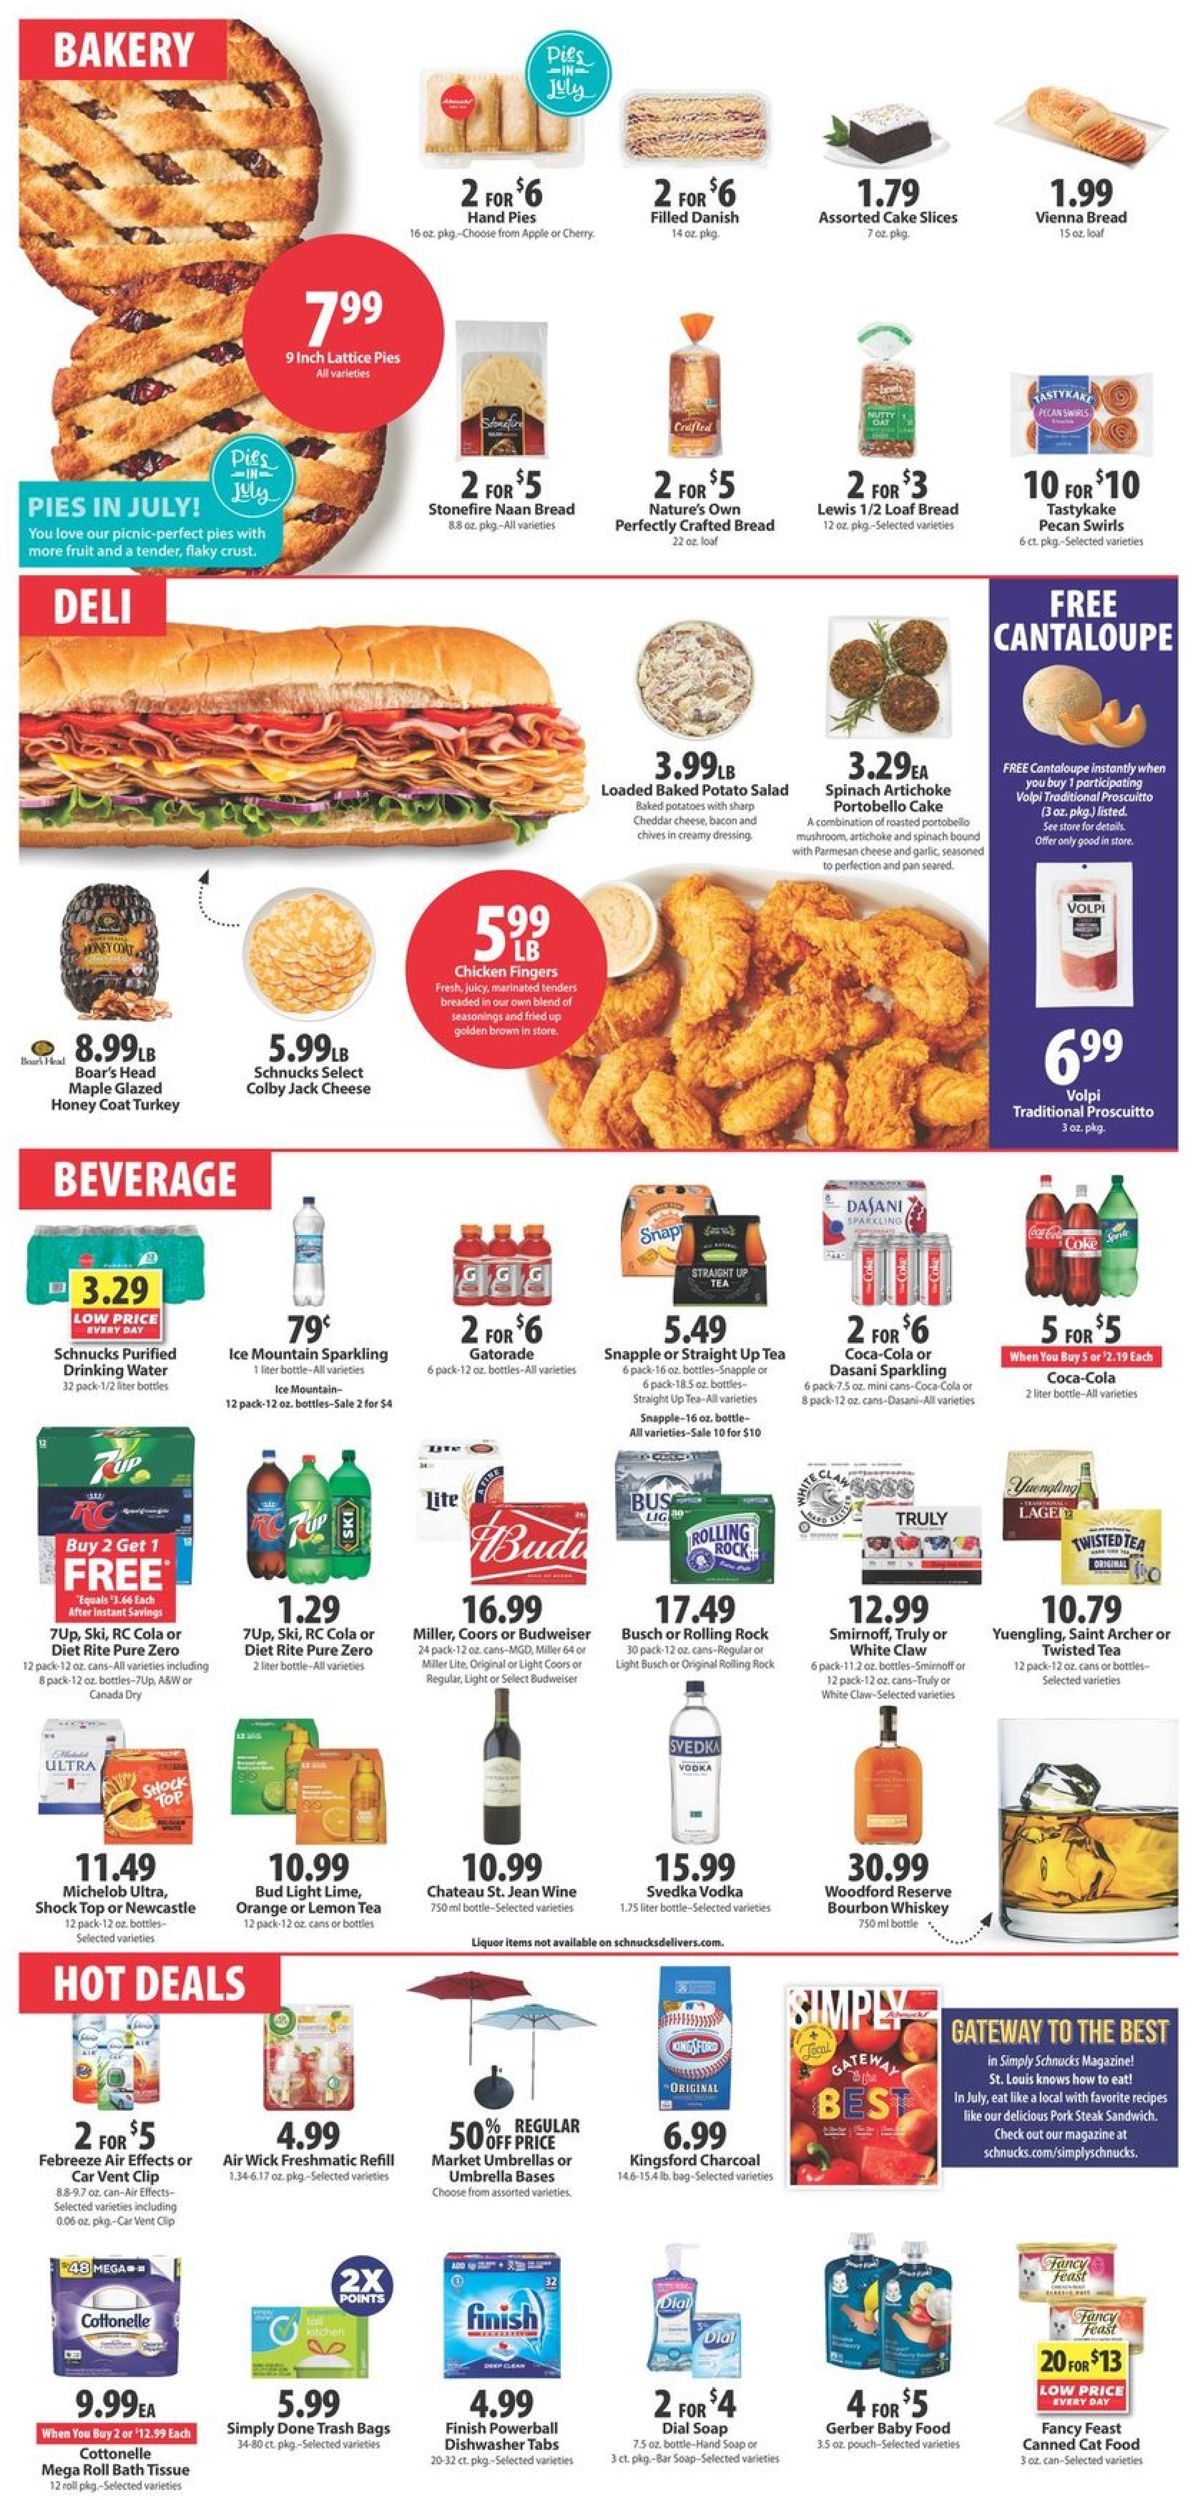 Schnucks Current weekly ad 07/17 - 07/23/2019 [3] - frequent-ads.com